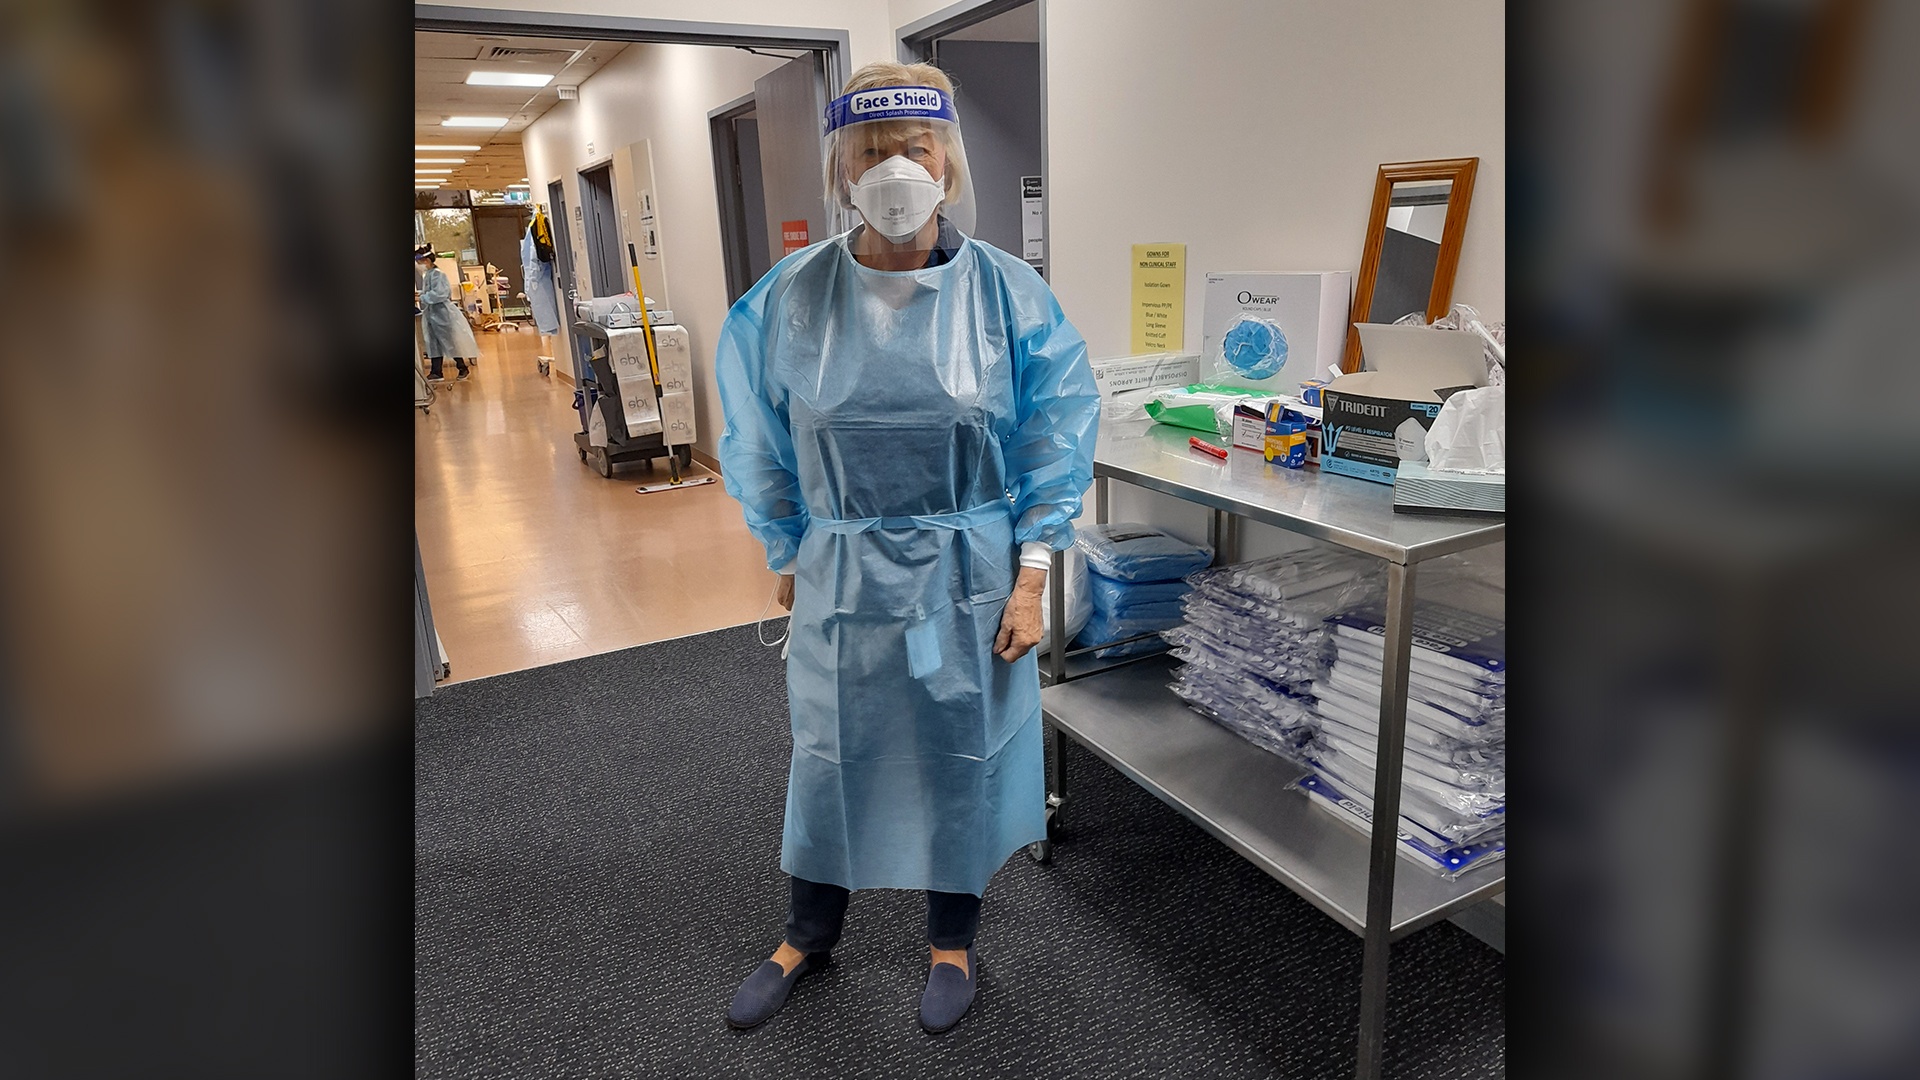 Volunteer Jenny Hill stands in a corridor, decked out head to toe in full PPE including a blue surgical gown, gloves, an N95 mask and a face shield.